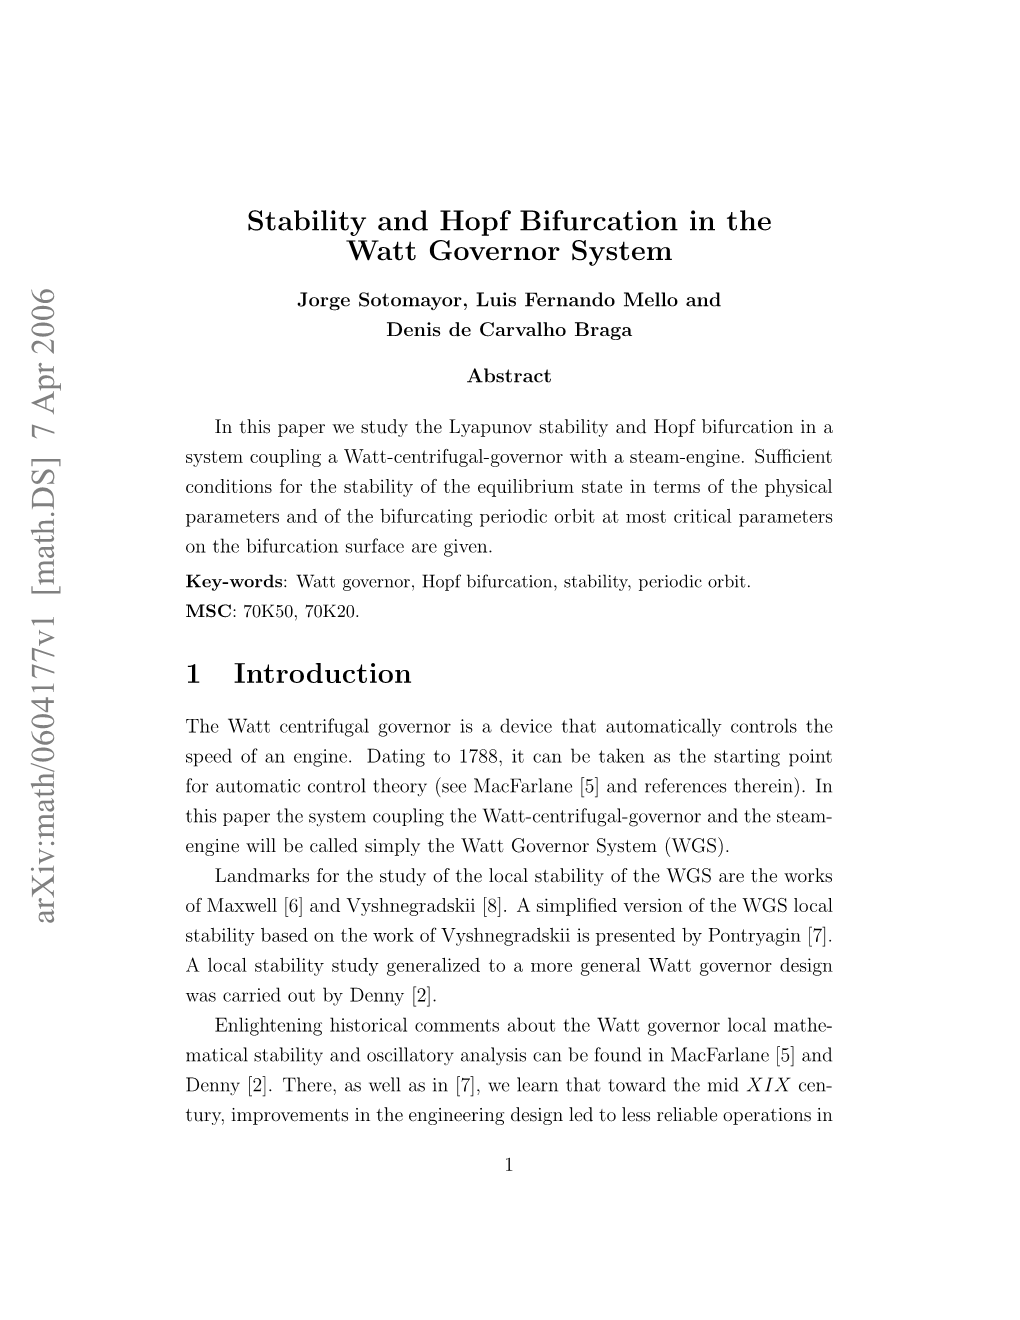 Stability and Hopf Bifurcation in the Watt Governor System